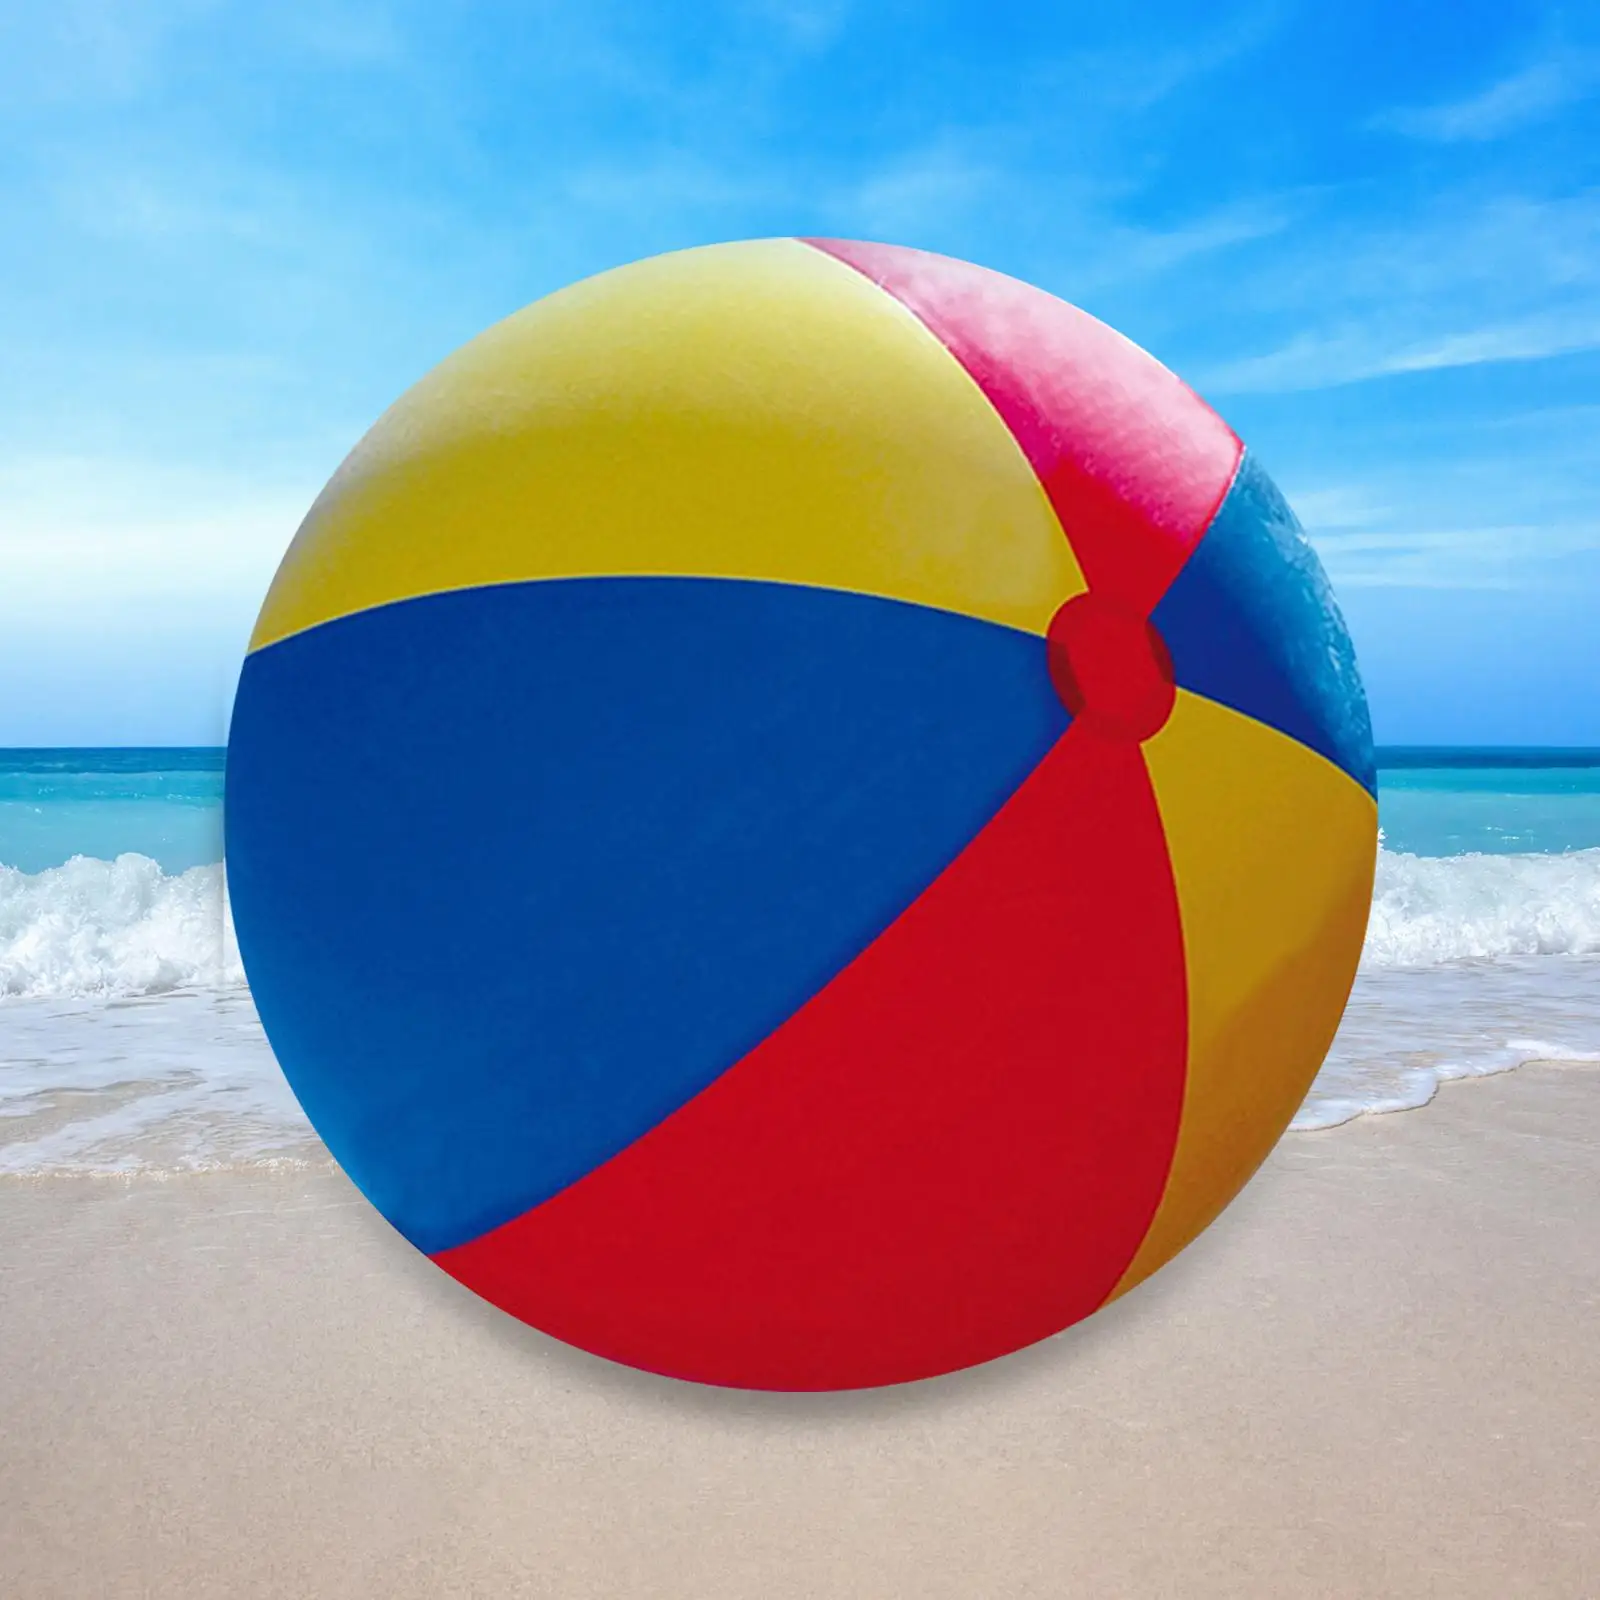 Giant Inflatable Beach Ball for Kids Adults Holiday Swimming Pool Pool Toy Sports Ball